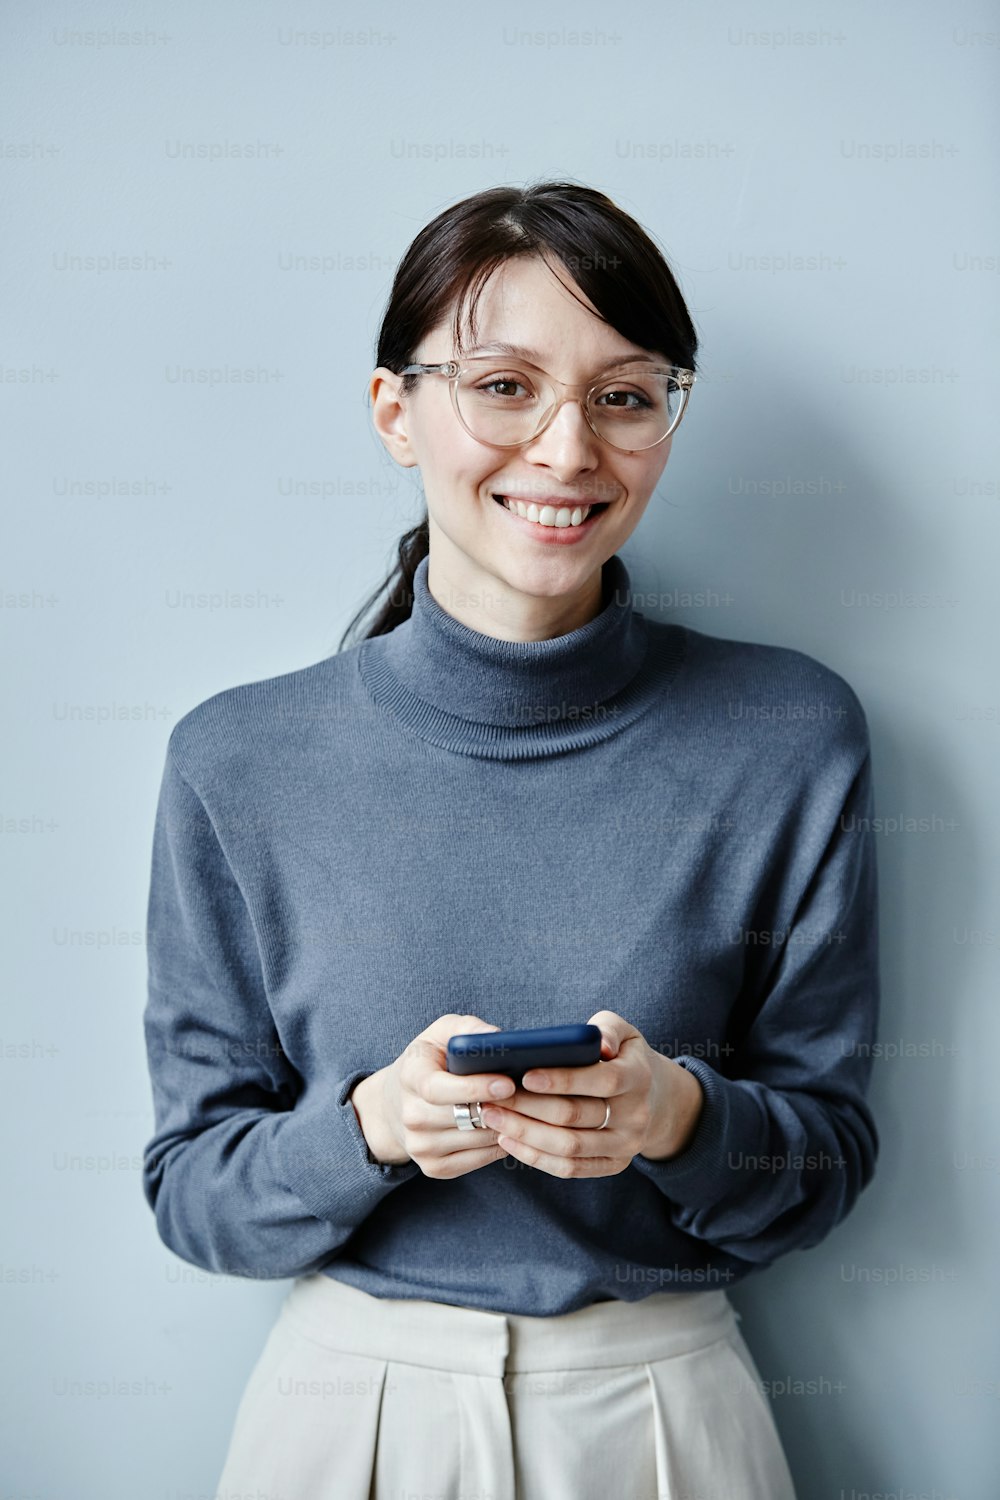 Candid portrait of young businesswoman holding smartphone and smiling at camera against simple blue background